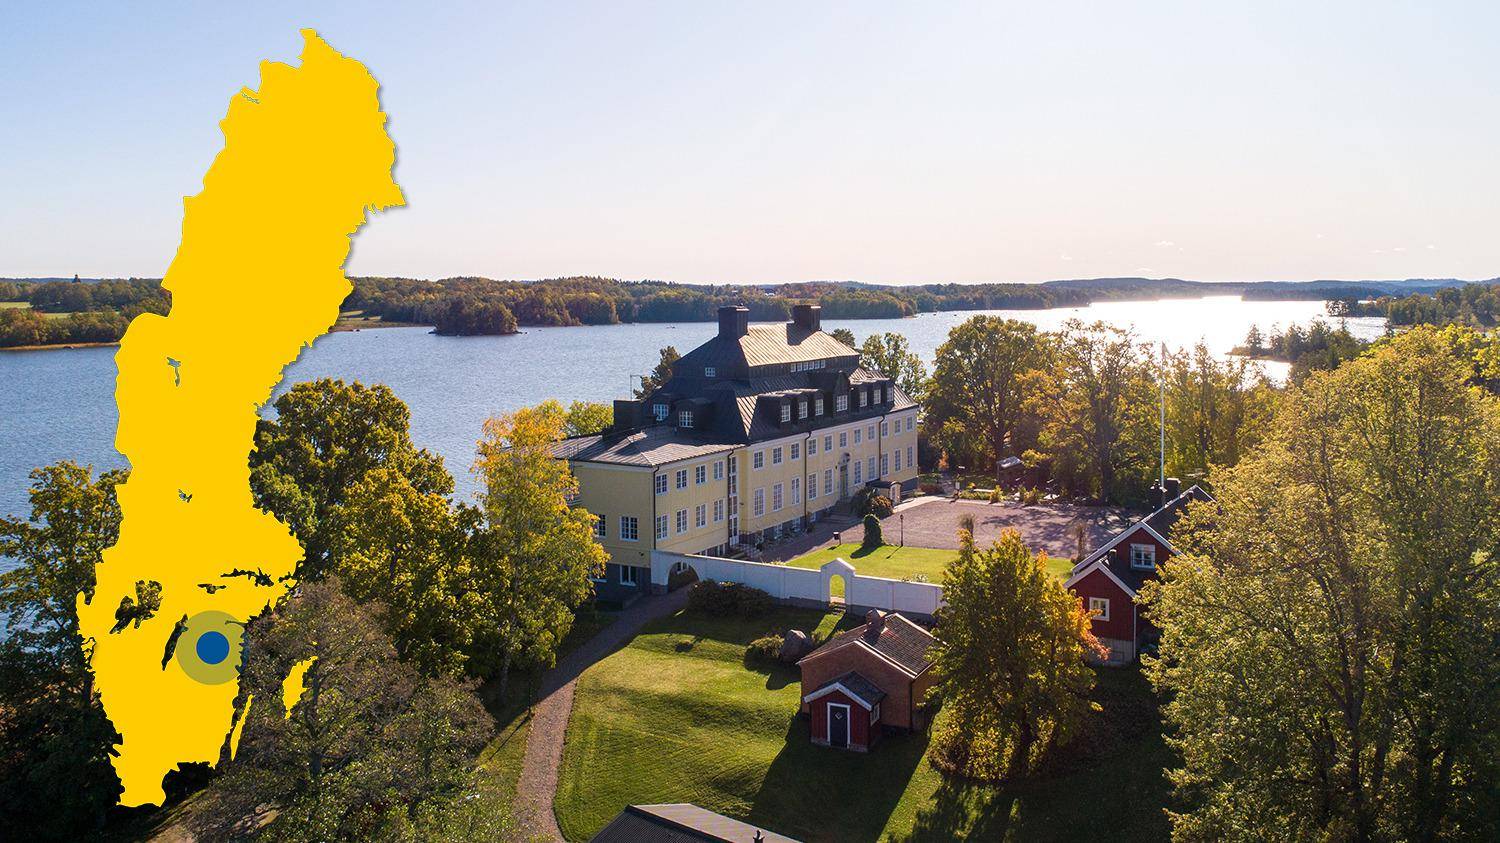 A manor with a yellow facade is located on a hill overlooking the water. In the picture is a yellow map of Sweden with a mark that shows Rimforsa.